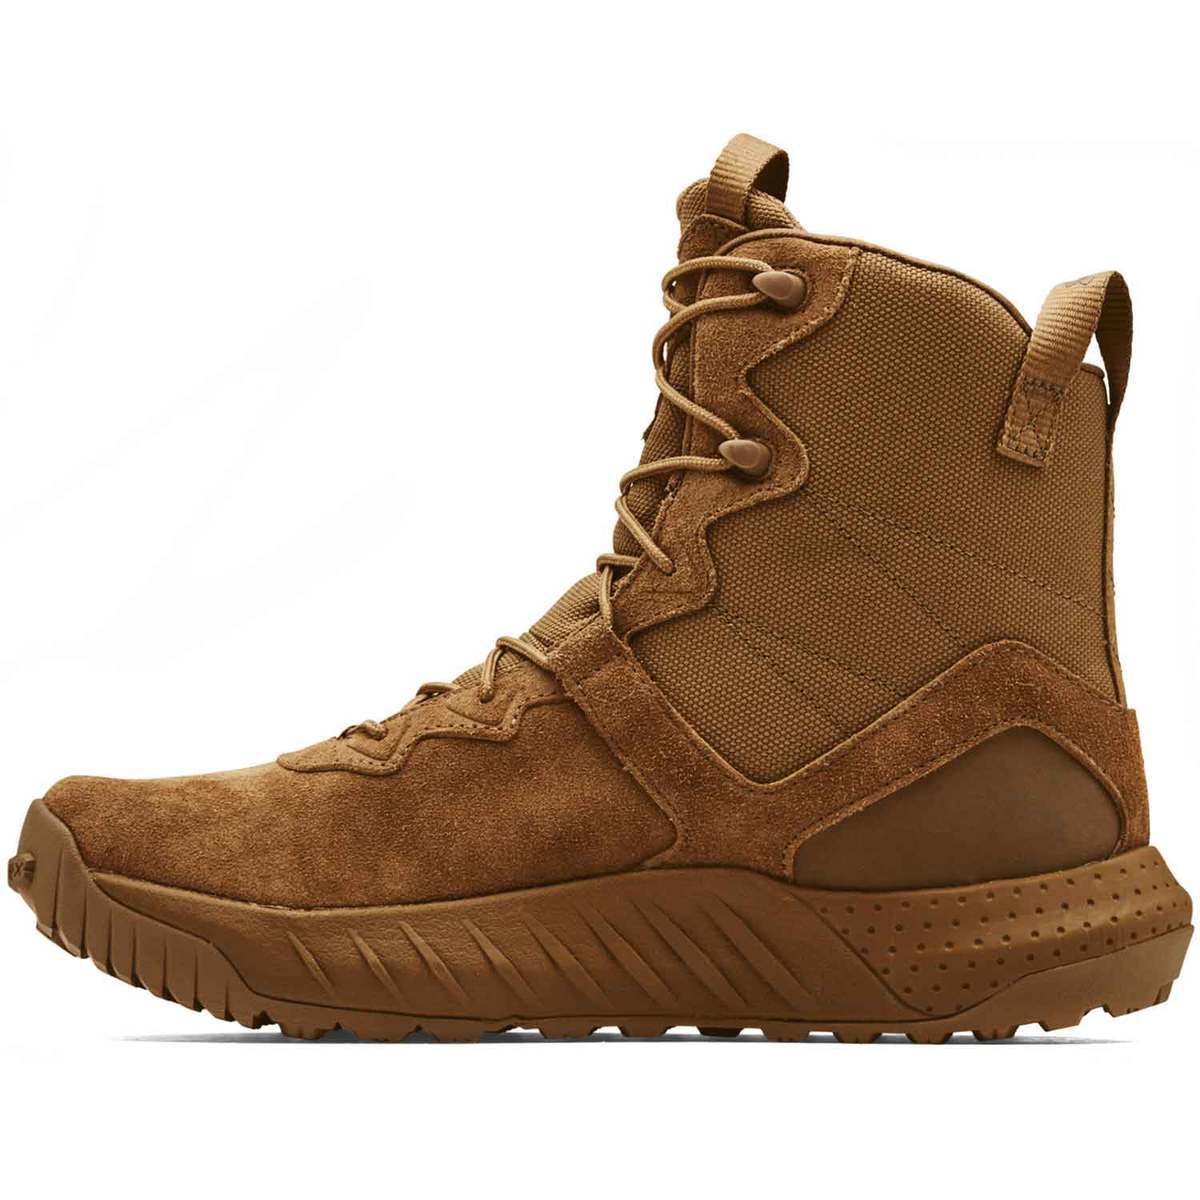 Under Armour Men's Micro G Valsetz Leather Tactical Work Boots - Coyote ...